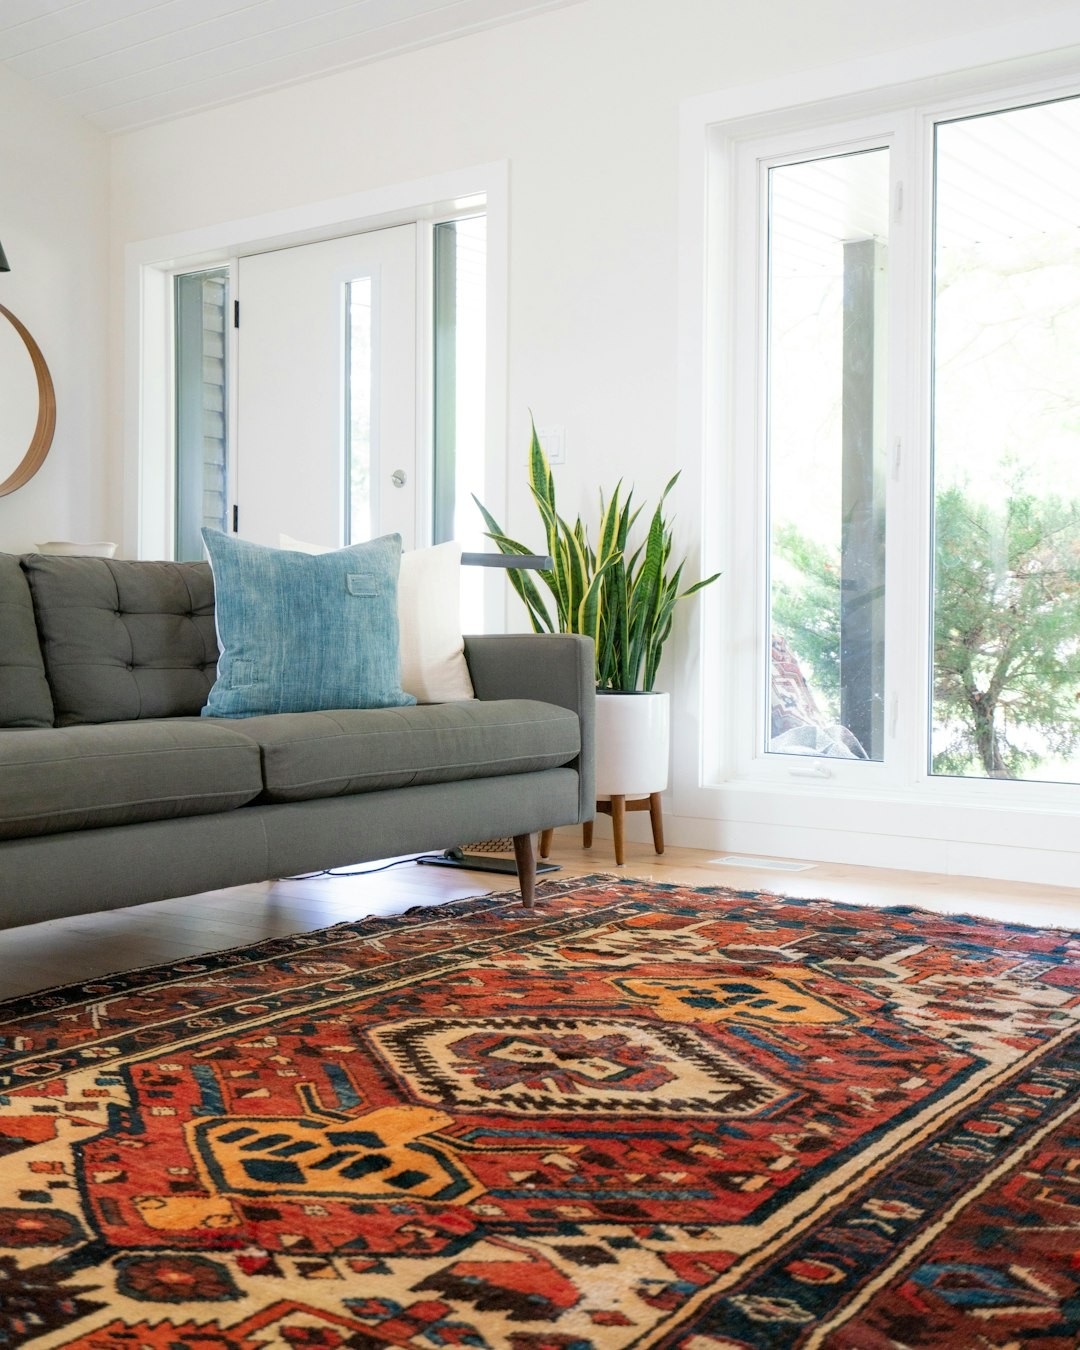 teal 2-seat couch and red area rug - eco-friendly cleaning ensures areas are safe for families and pets